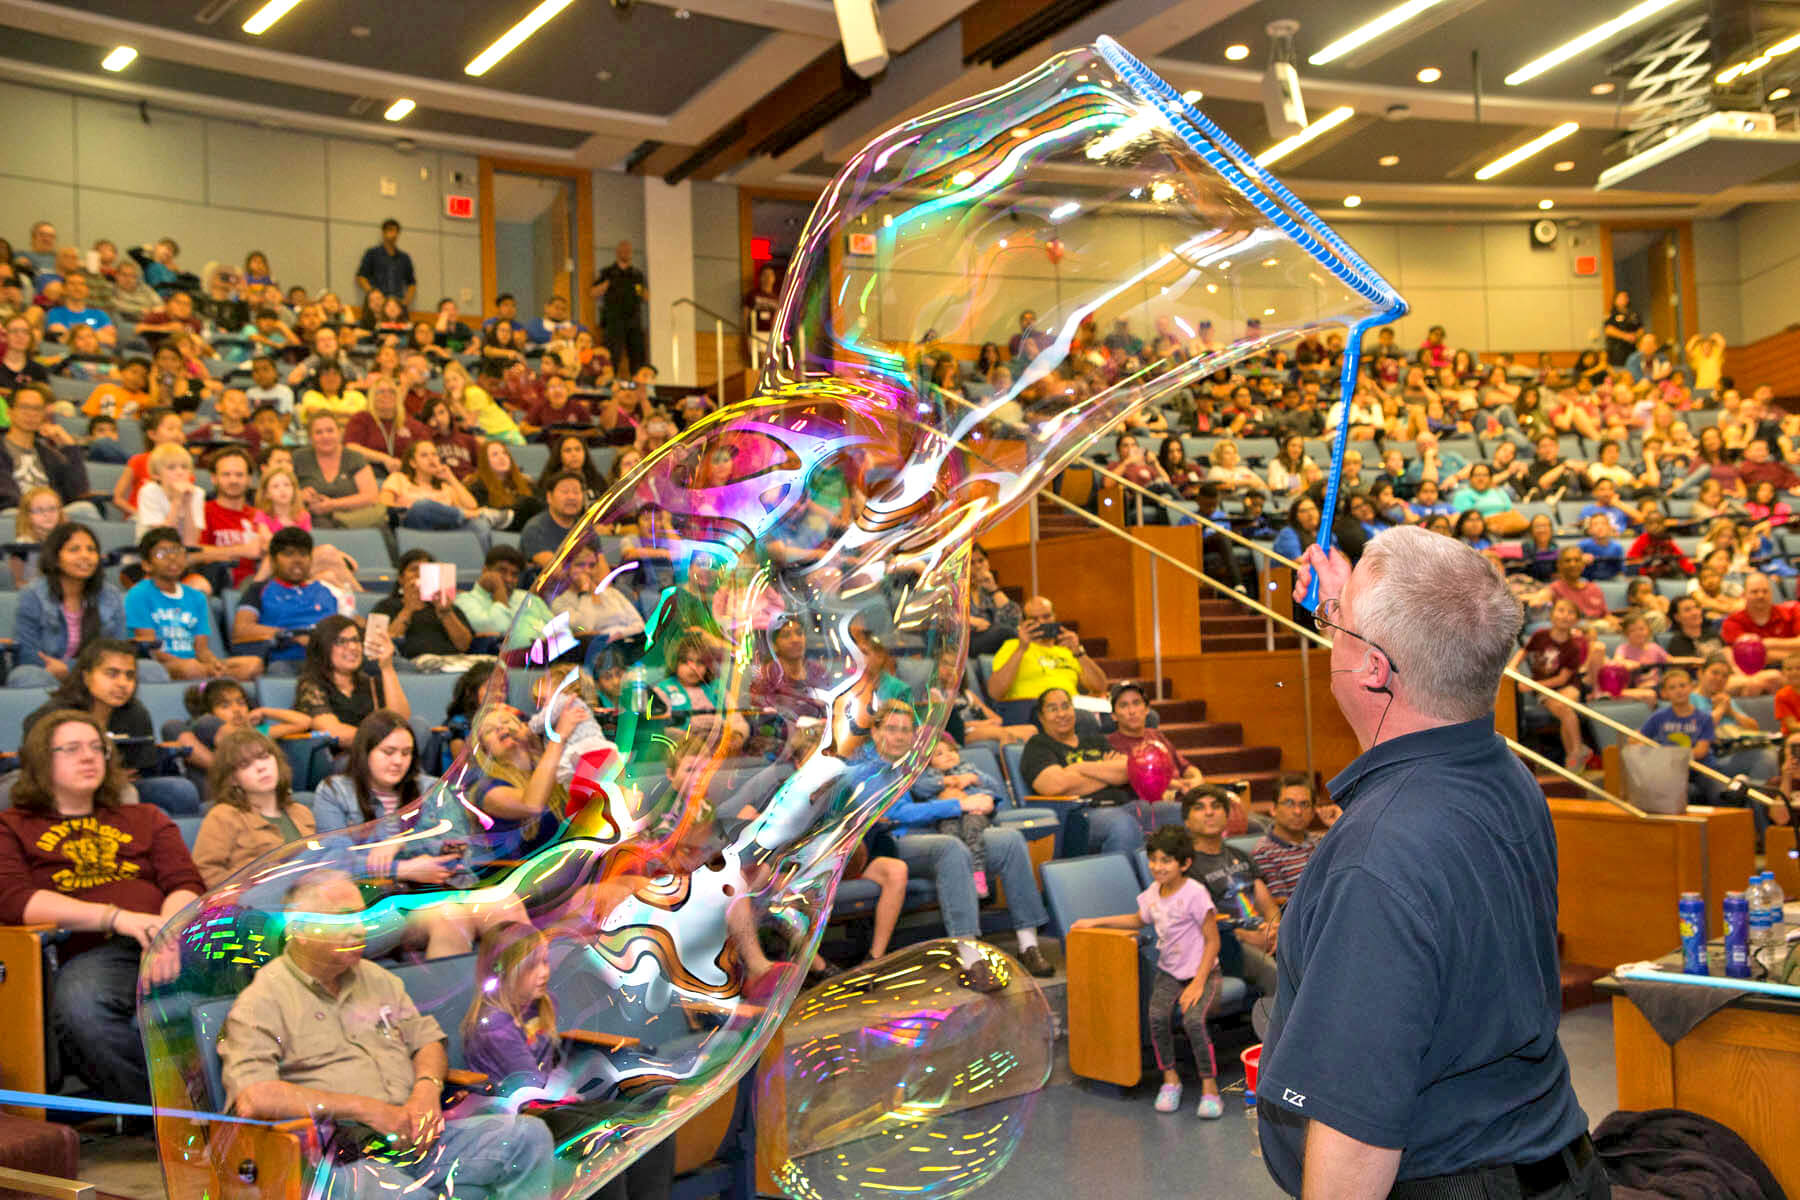 Watch the marvelous motion of soap bubbles large and small in a container with dry ice.